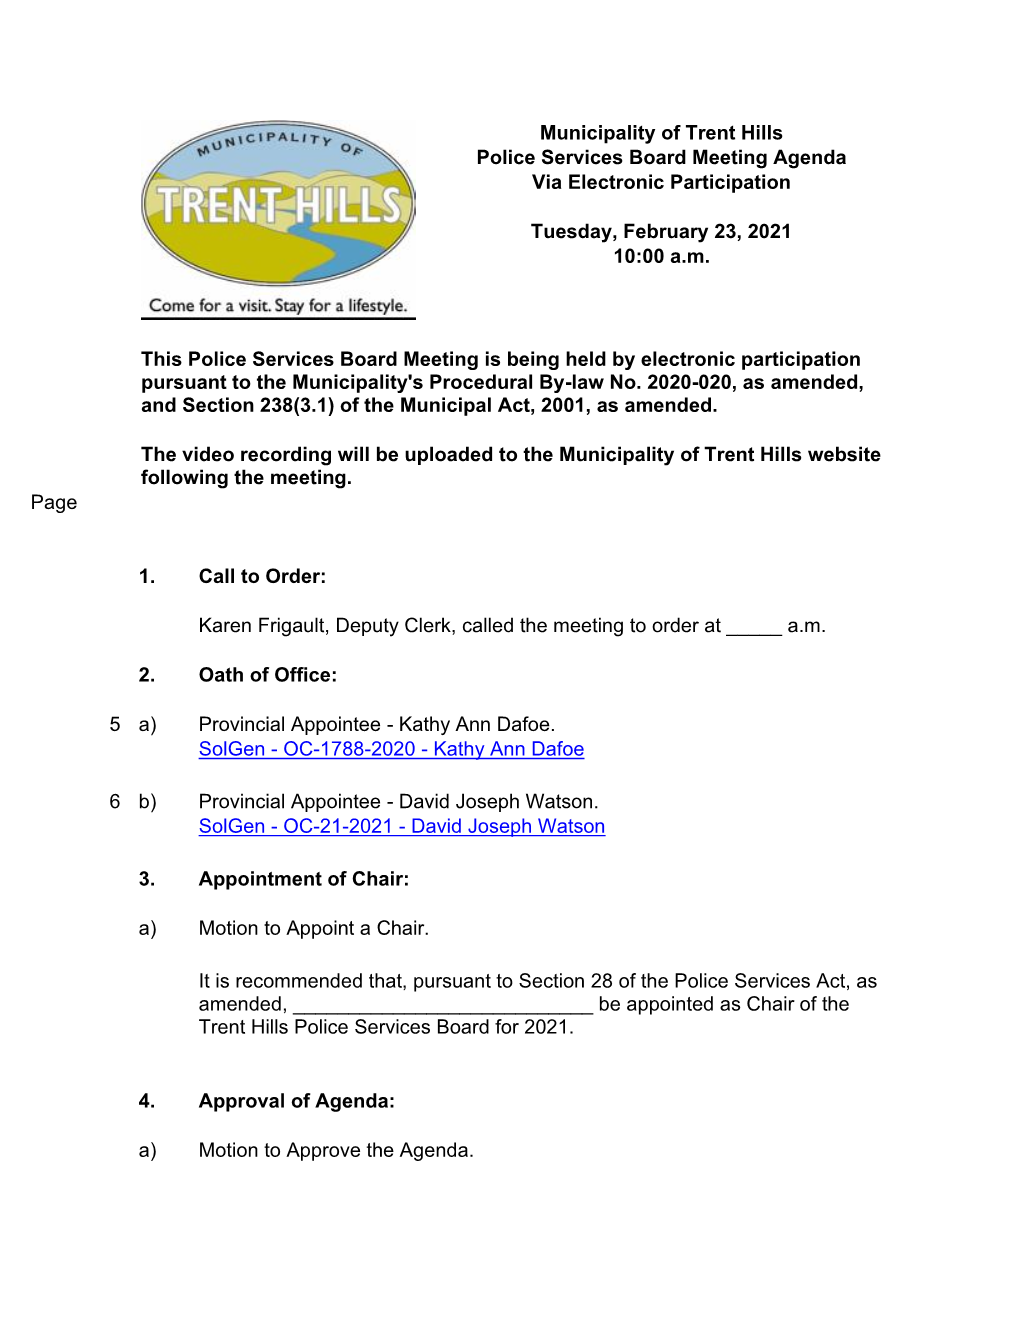 Police Services Board Meeting Agenda Via Electronic Participation